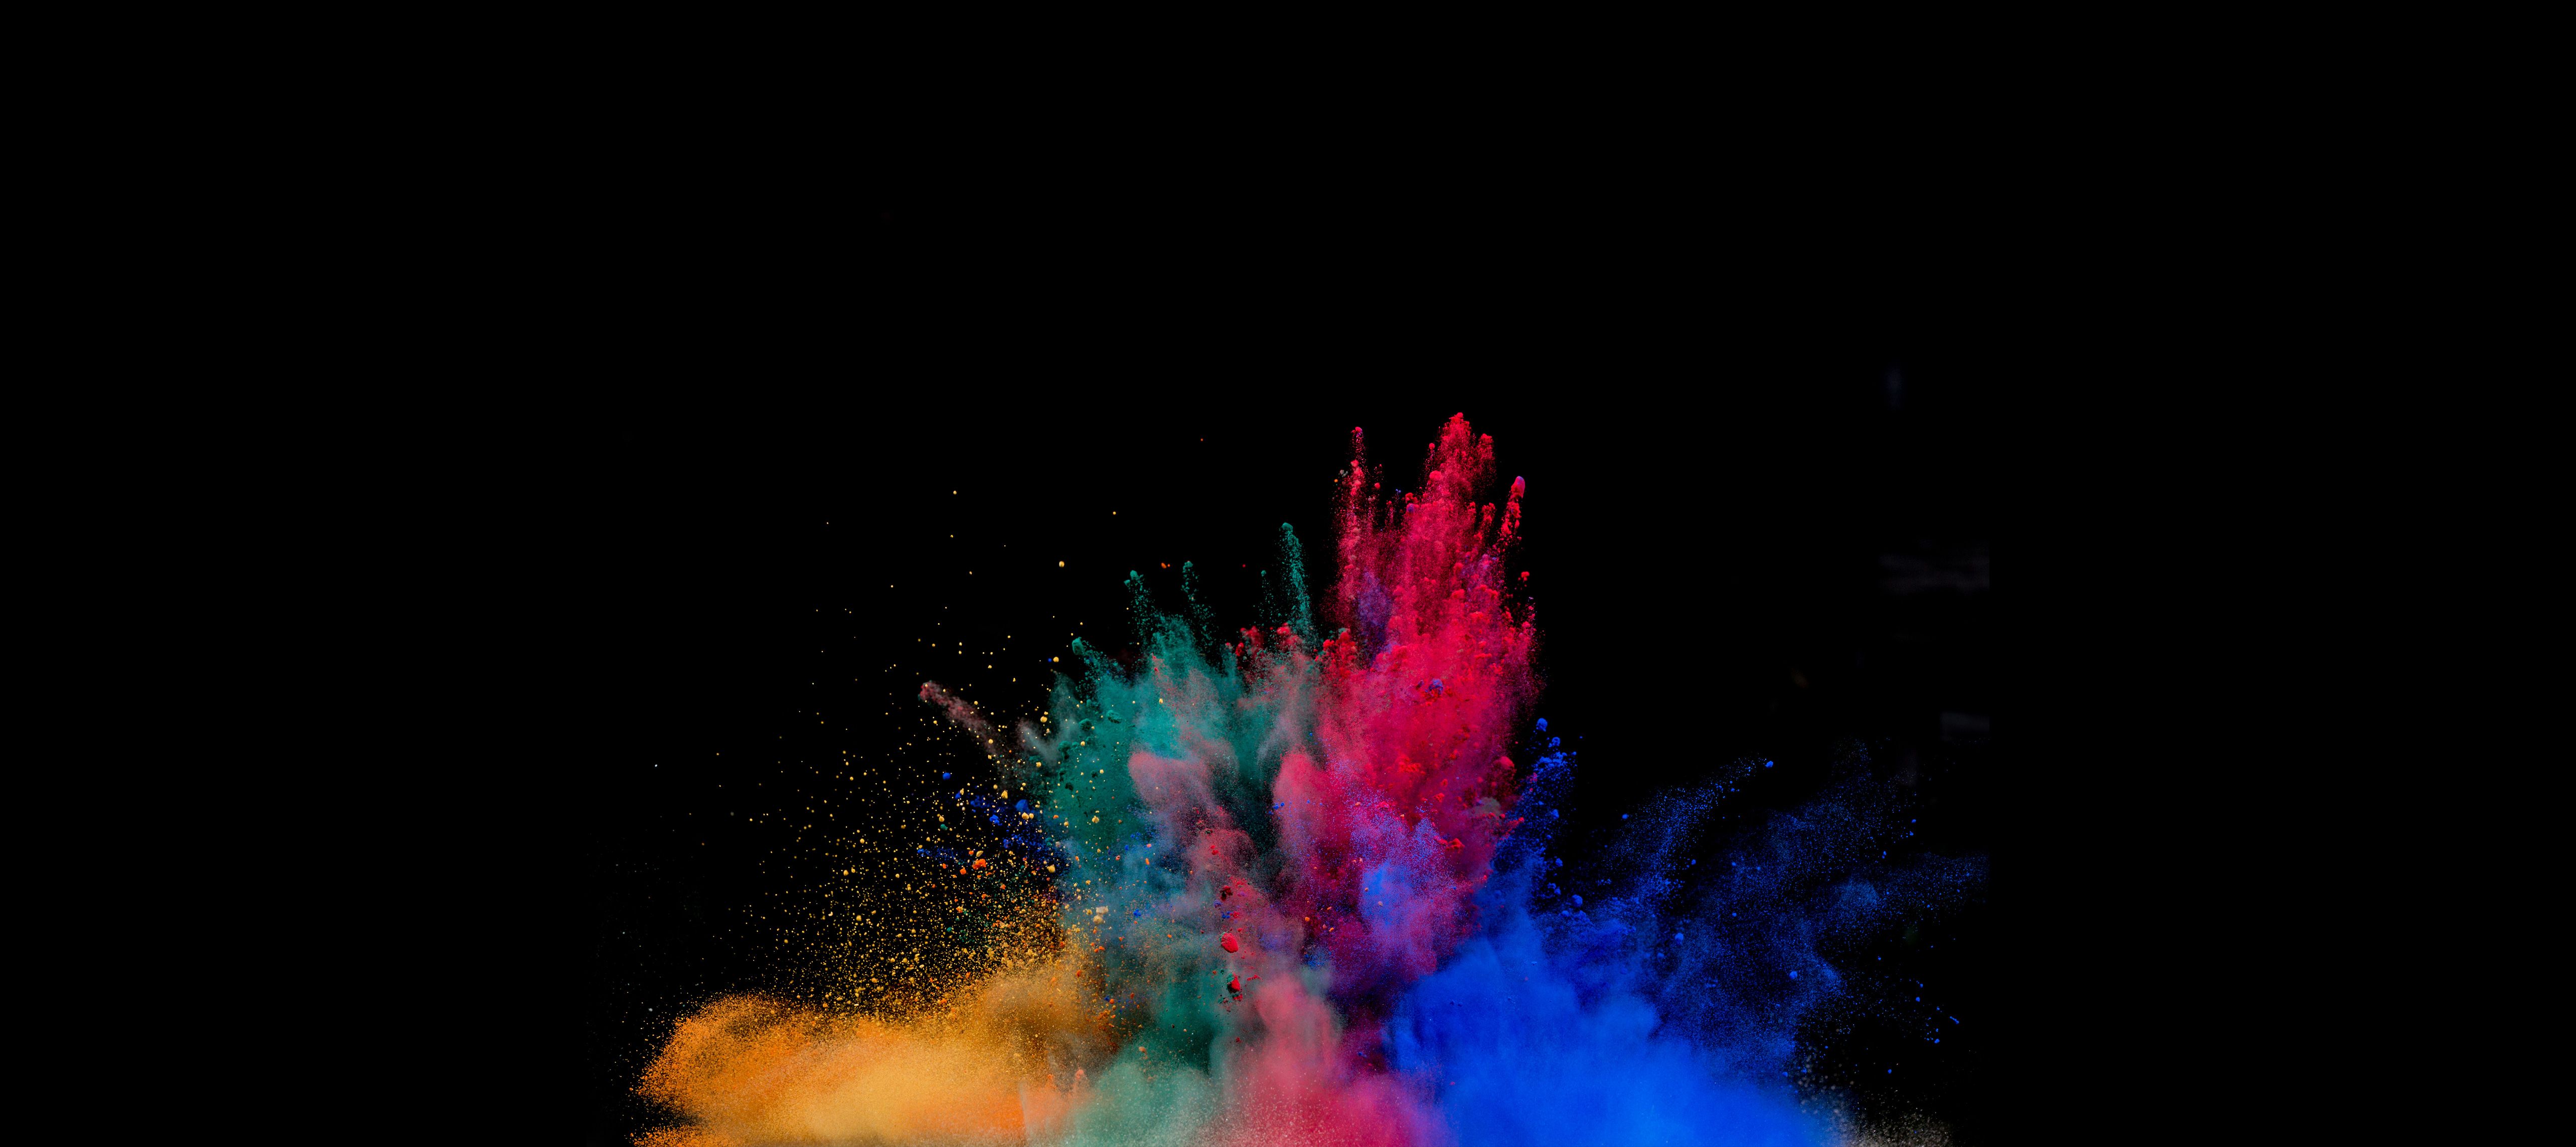 Colorful Powder Explosion, HD Artist, 4k Wallpaper, Image, Background, Photo and Picture